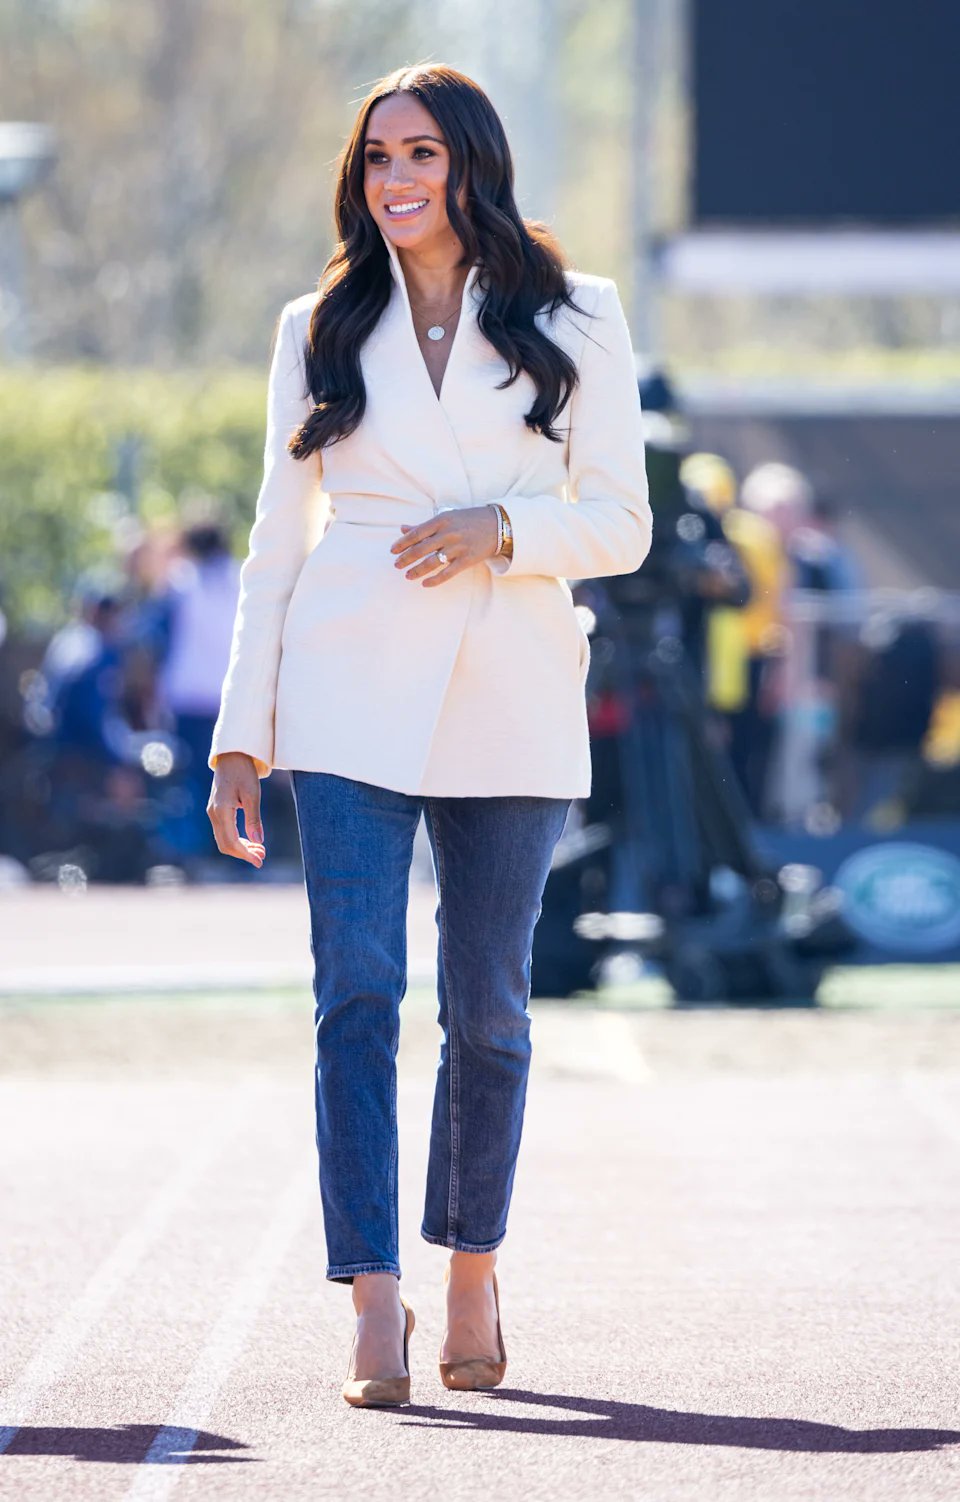 meghan-markle-duchess-of-sussex-wore-brandon-maxwell-day-2-of-the-invictus-games